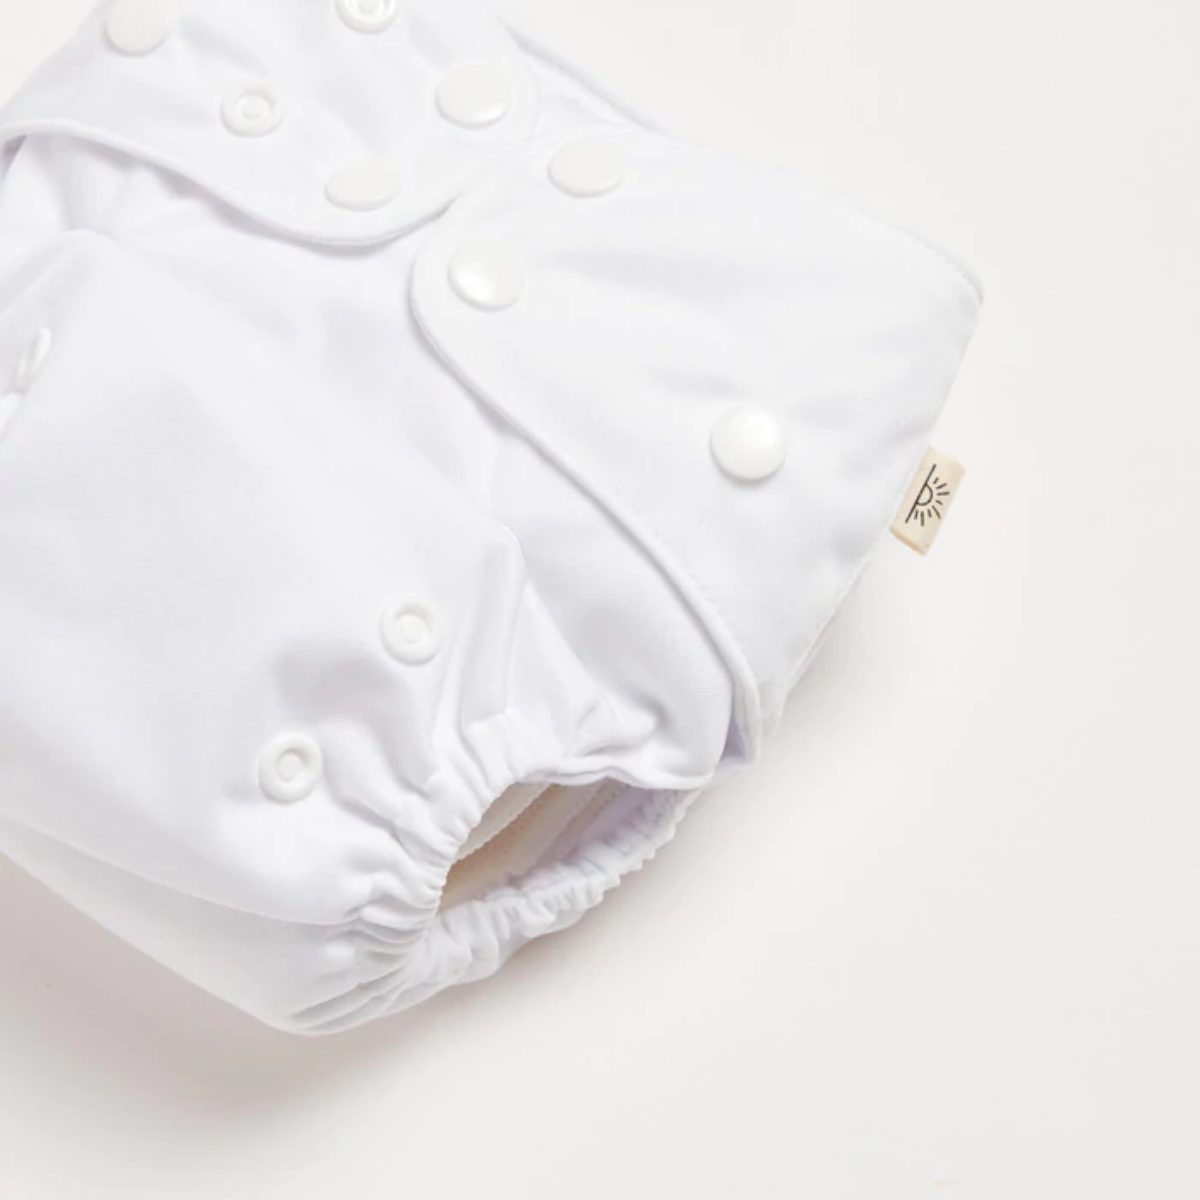 A Snow White 2.0 Modern Cloth Nappy by EcoNaps on a white surface.